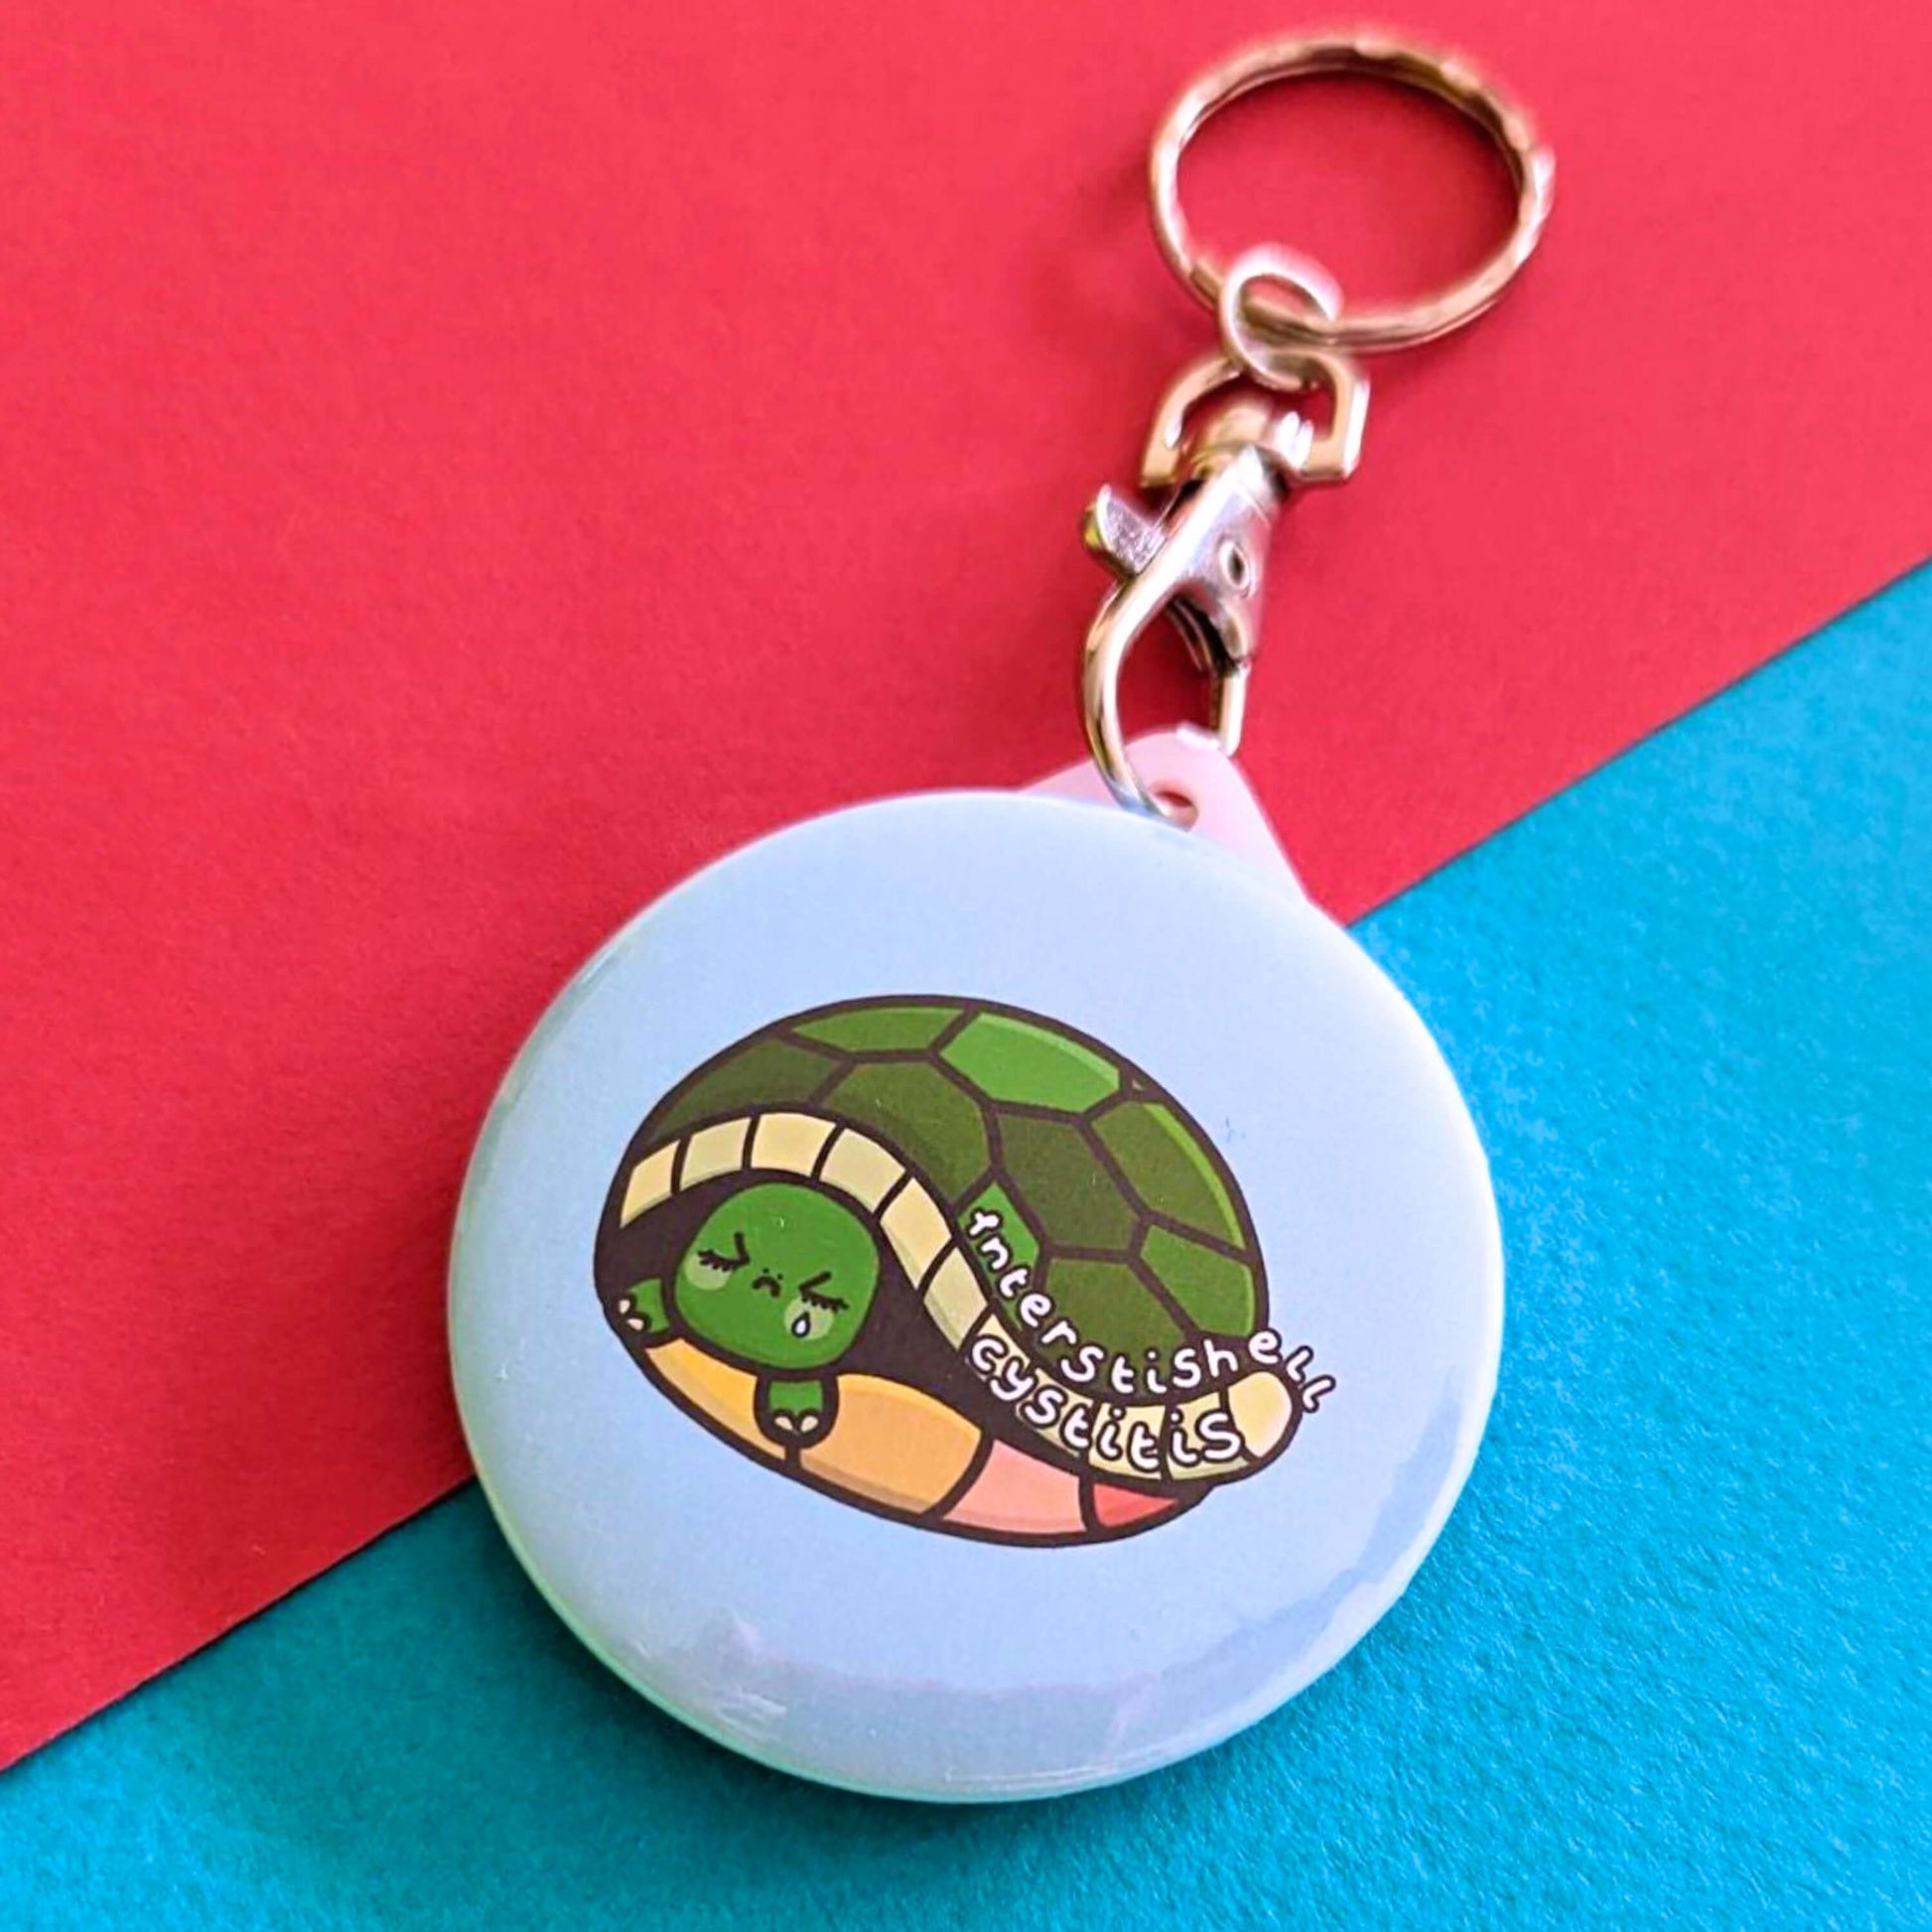 The Interstishell Cystitis Tortoise Keyring - IC Interstitial Cystitis on a red and blue background. The silver lobster clip circular keychain is a pale blue with a sad tortoise crying with white text reading 'interstishell cystitis'. The hand drawn design is raising awareness for Bladder pain syndrome interstitial cystitis.